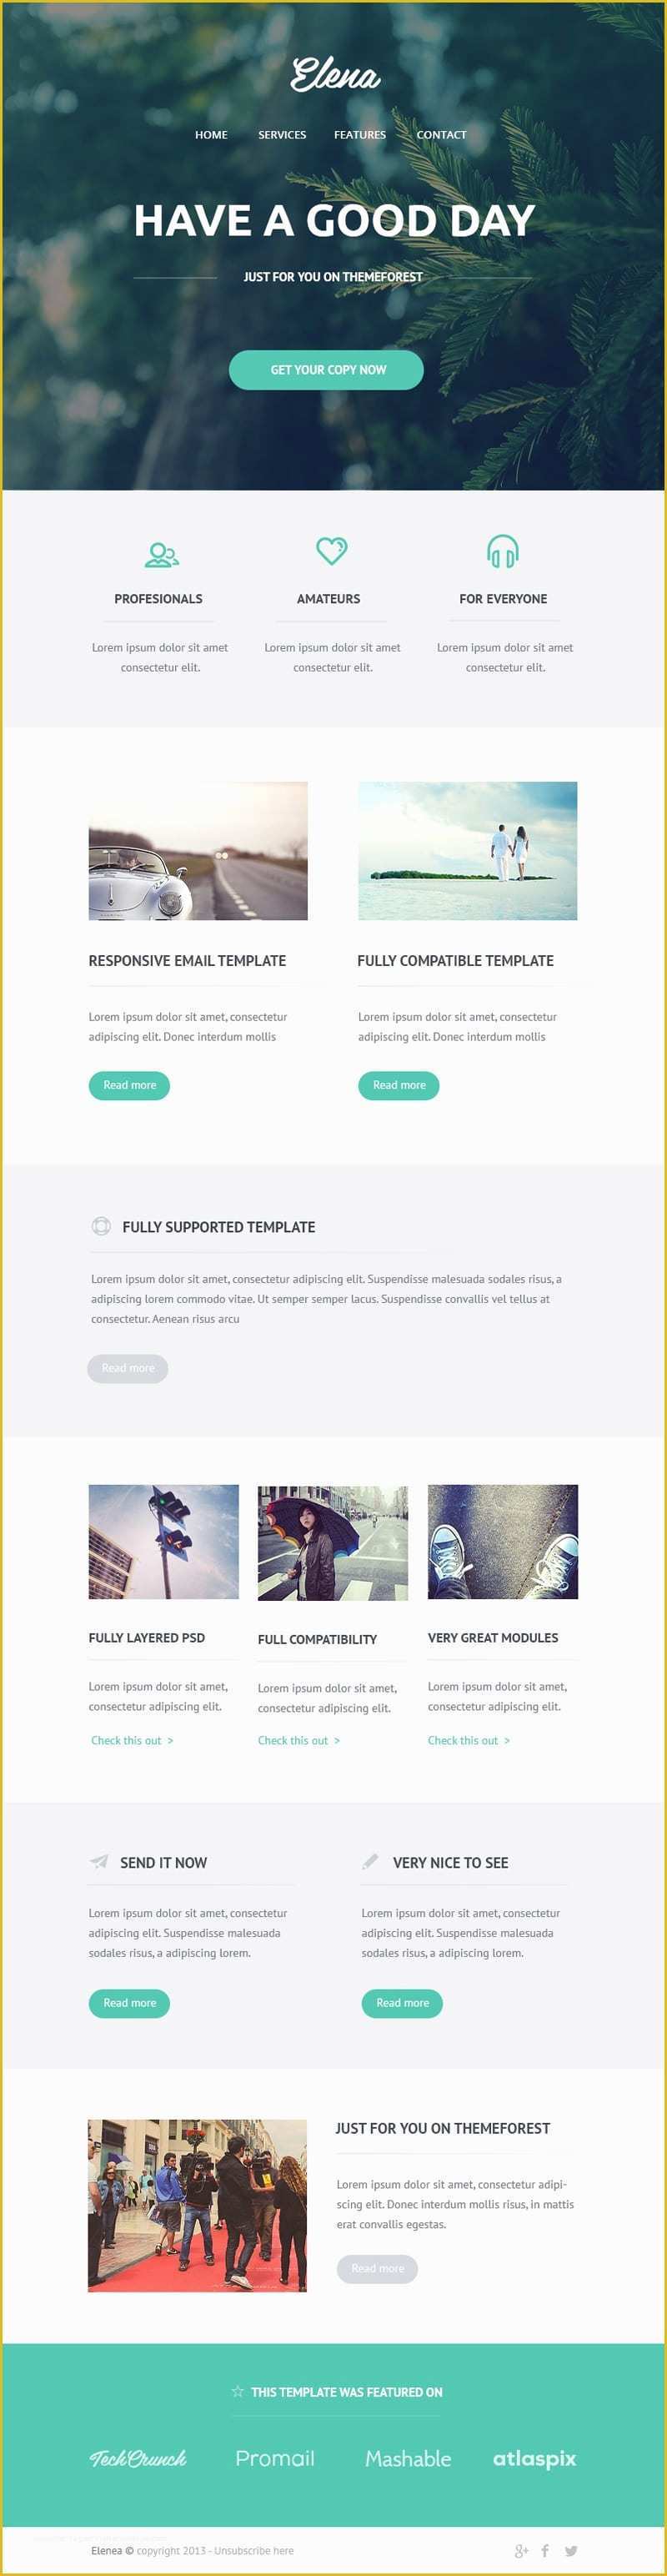 Free Email Templates Of Free Email Newsletter Templates Psd Css Author